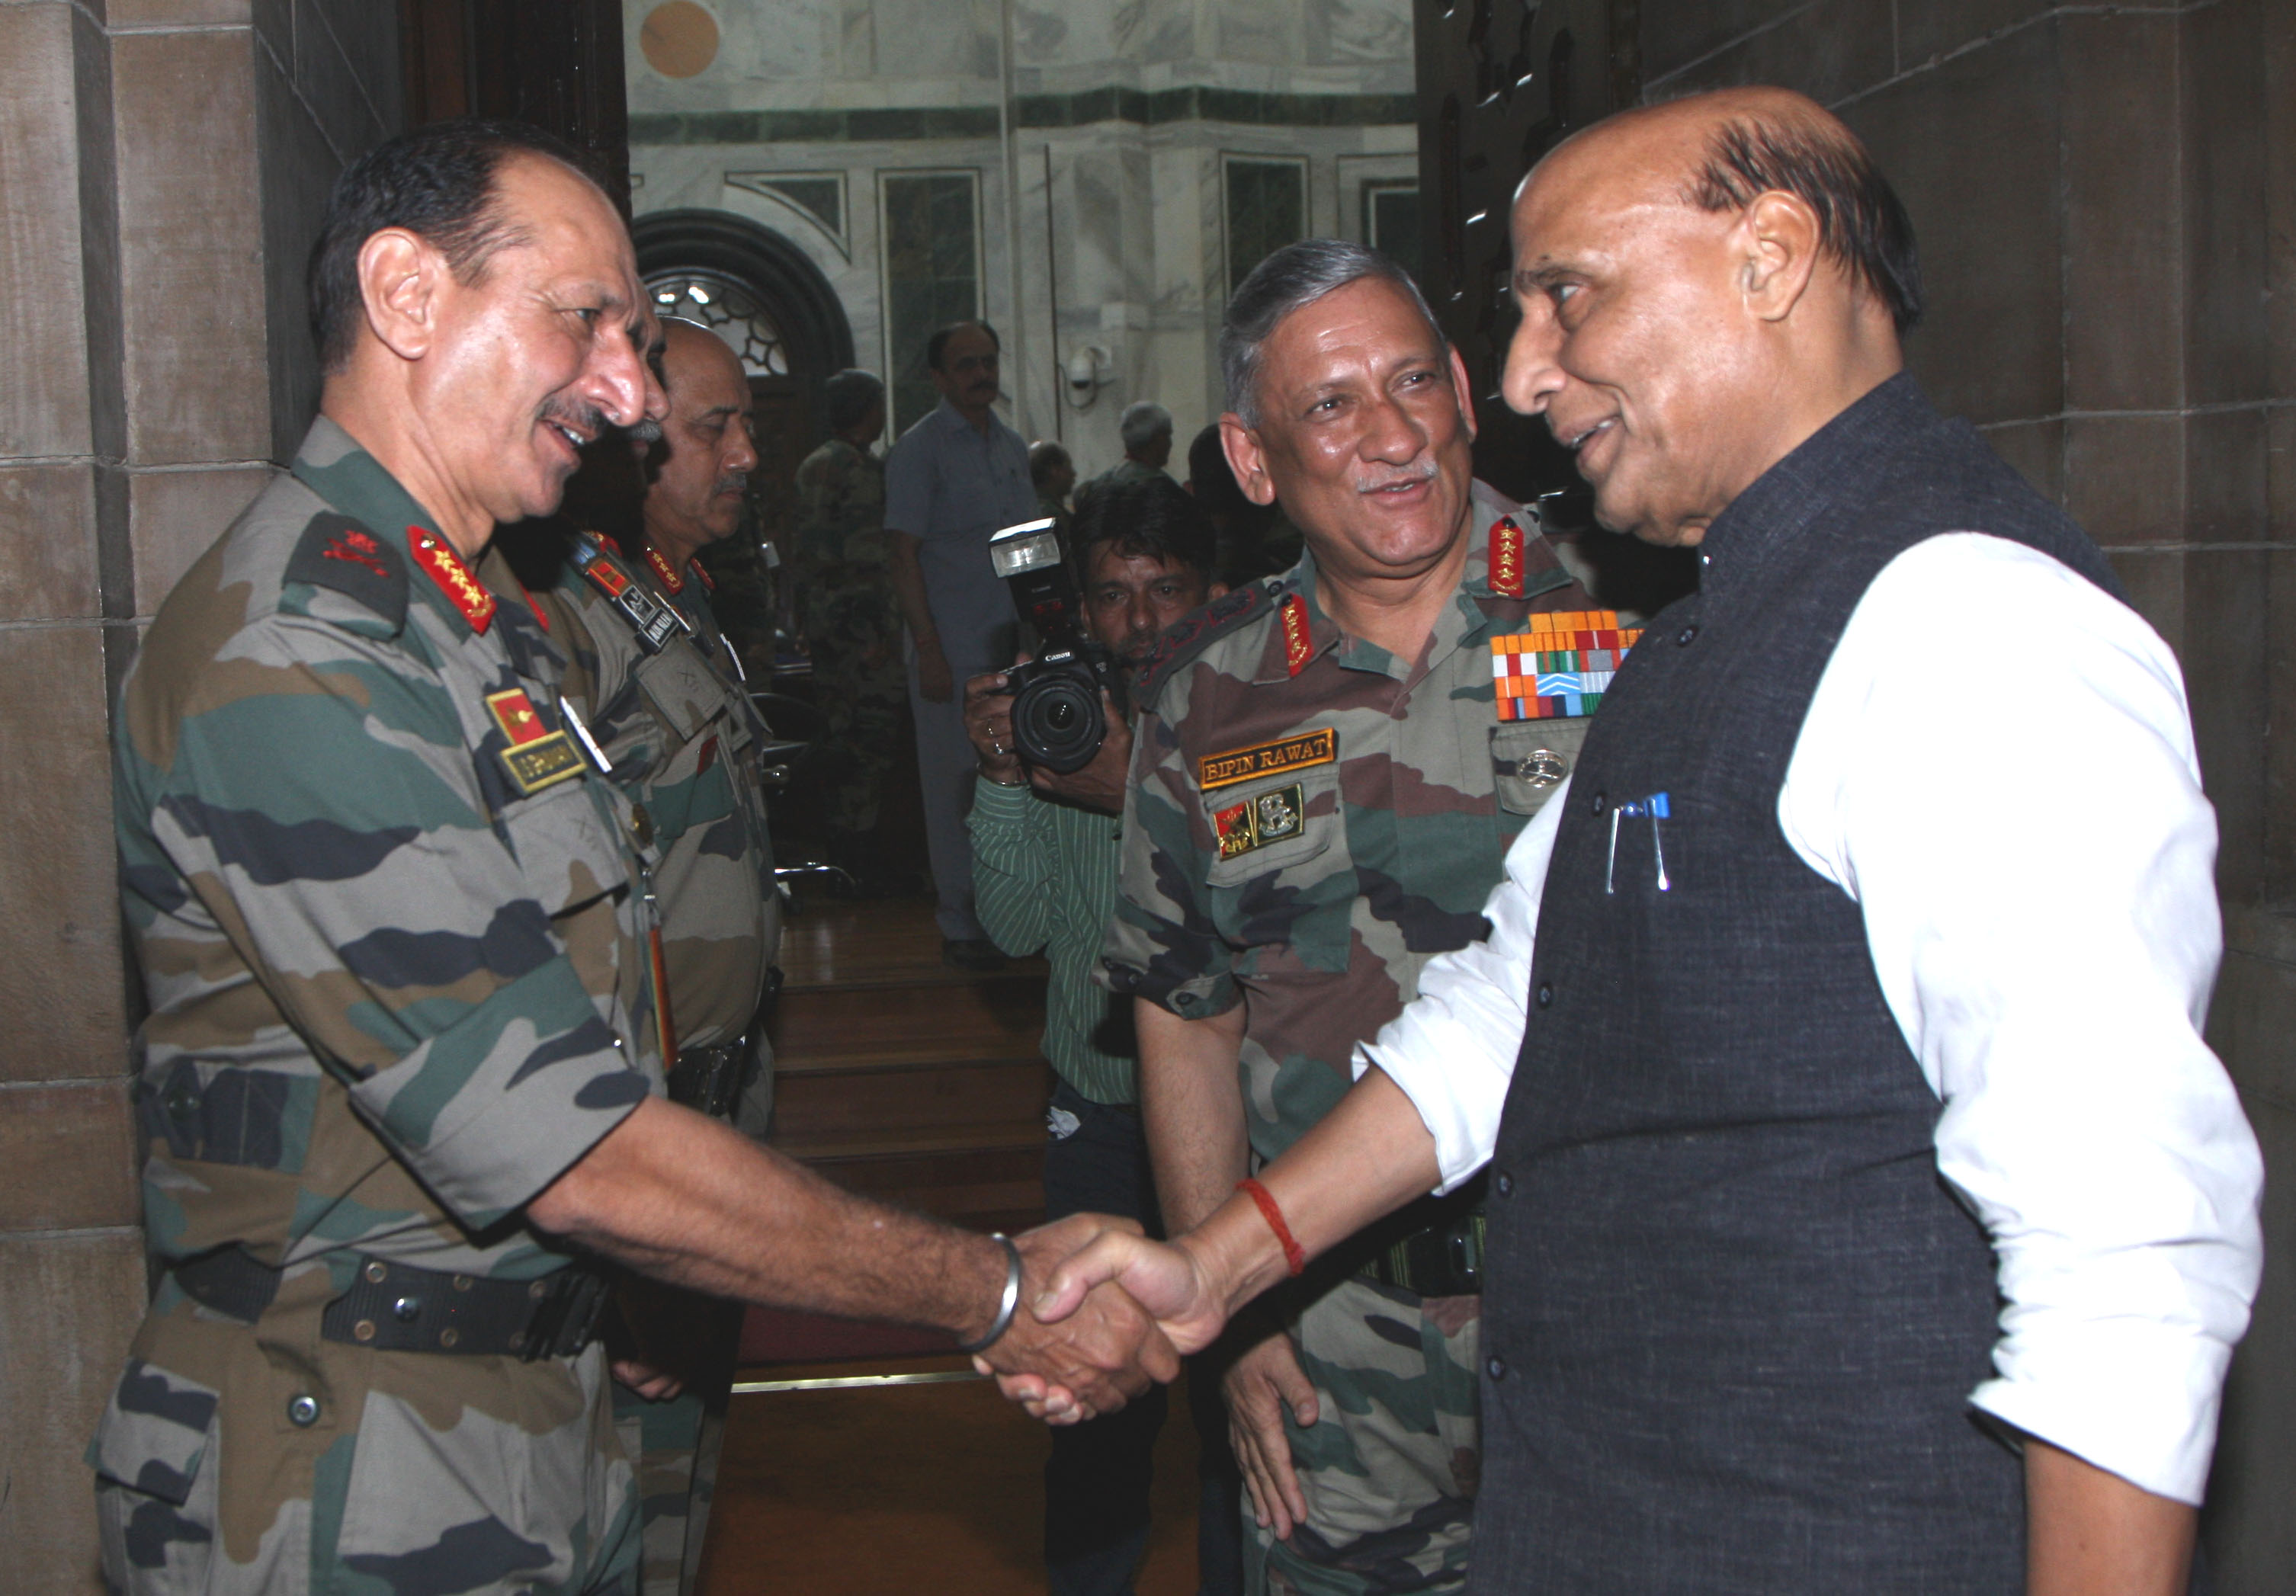 Raksha Mantri Shri Rajnath Singh meeting Army Commanders at the Army Commanders Conference in New Delhi on Friday, October 18, 2019. Also seen is Chief of the Army Staff General Bipin Rawat